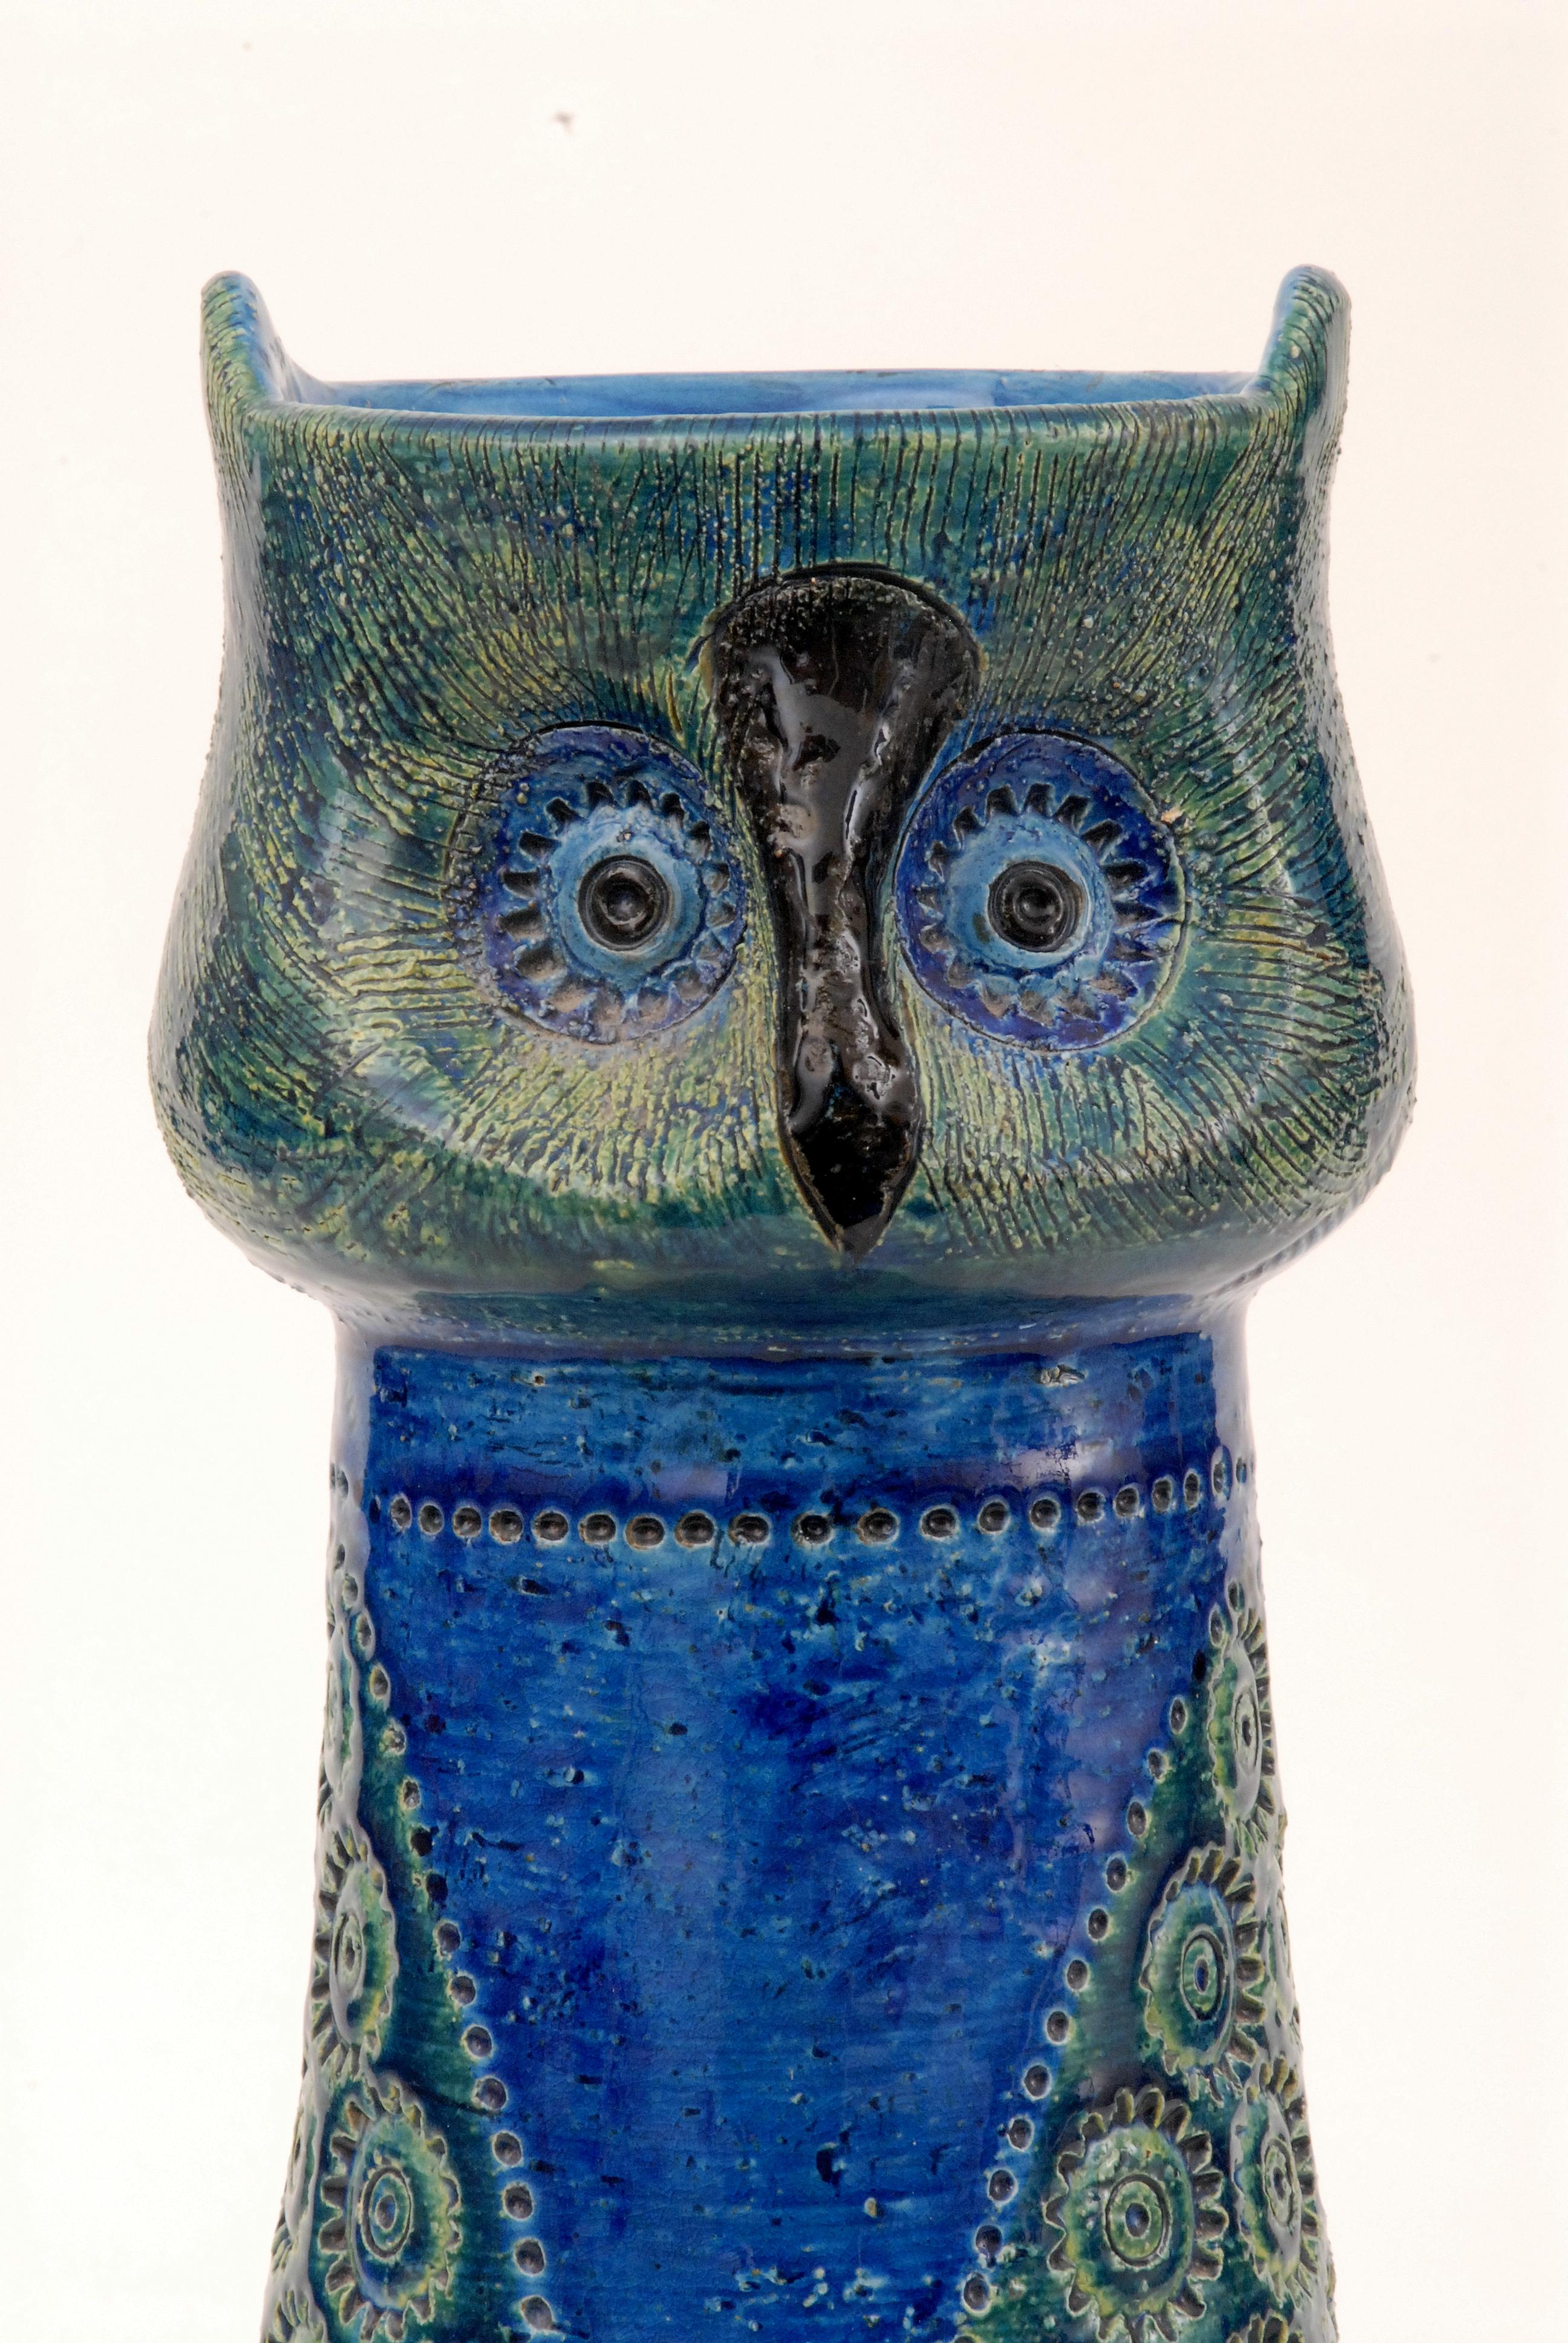 A large Aldo Londi designed Owl ['Gufo'] slip-cast vase, designed in 1963 with mottled glazes, impressed star motifs and dots and scraffito lines. The base with a Rosenthal-Netter paper label and impressed stamp 'Made in Italy' and black under glaze